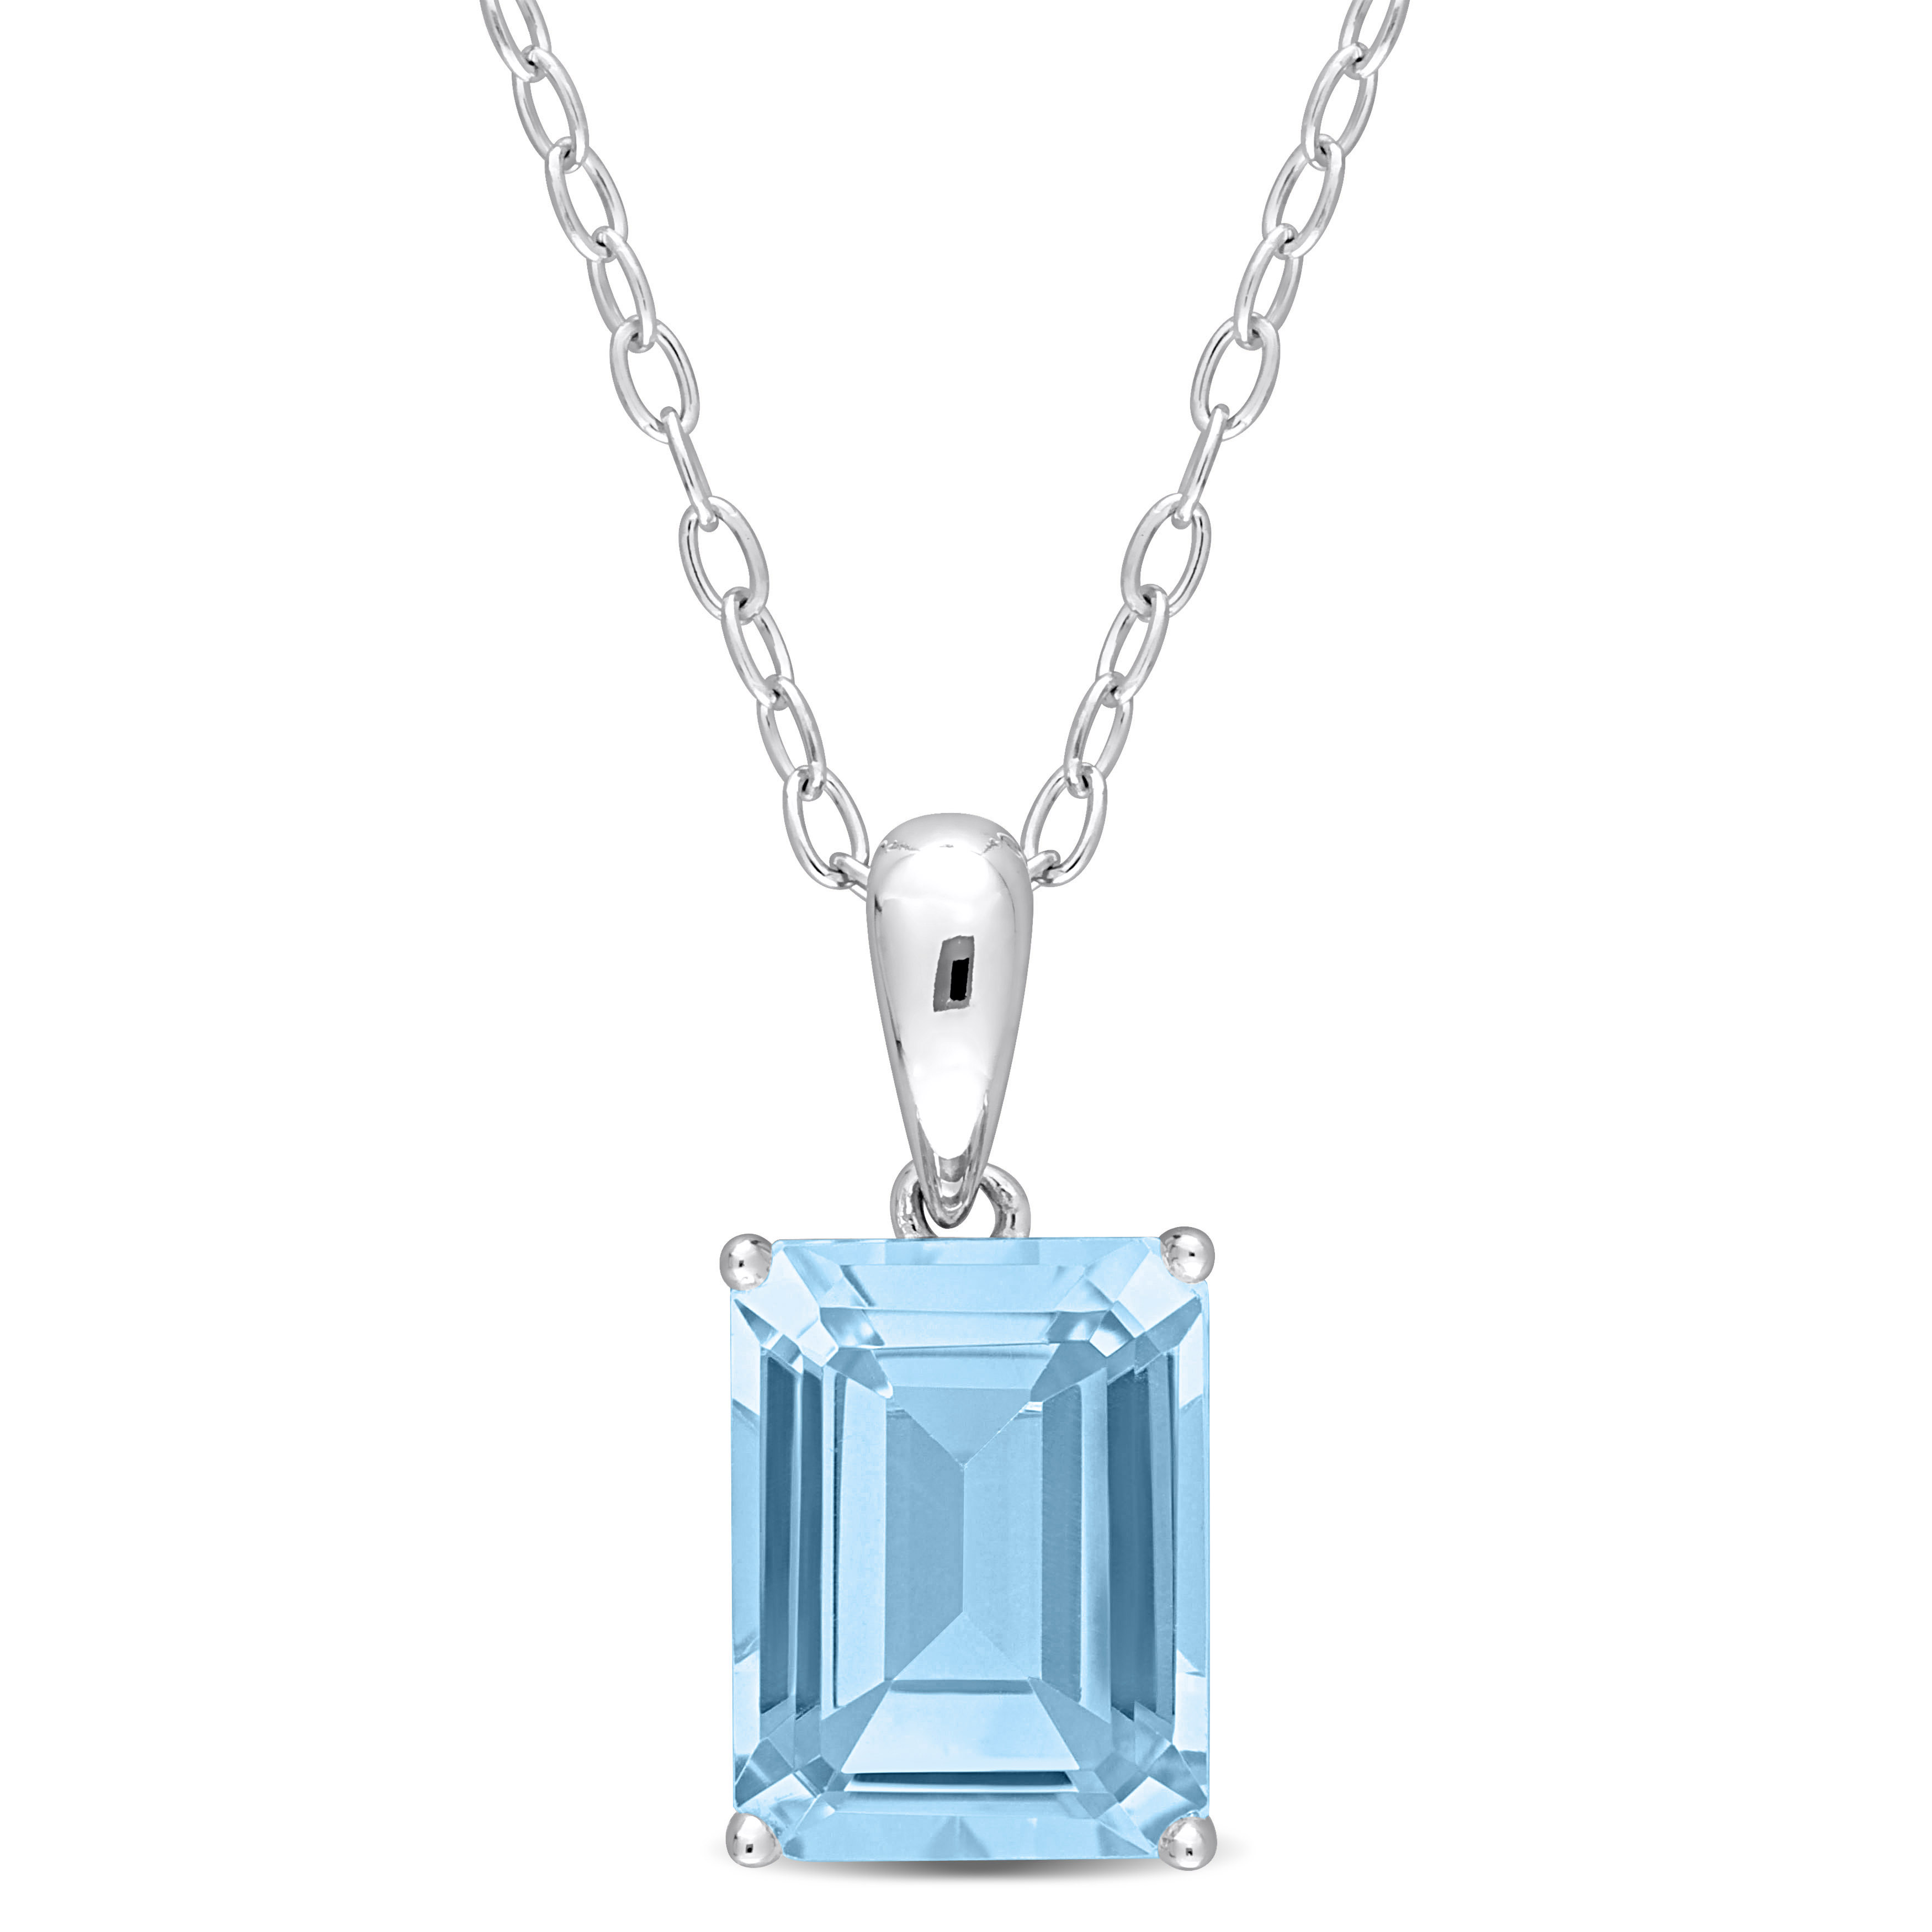 2 3/4 CT TGW Emerald Cut Sky Blue Topaz Solitaire Heart Design Pendant with Chain in Sterling Silver - 18 in.